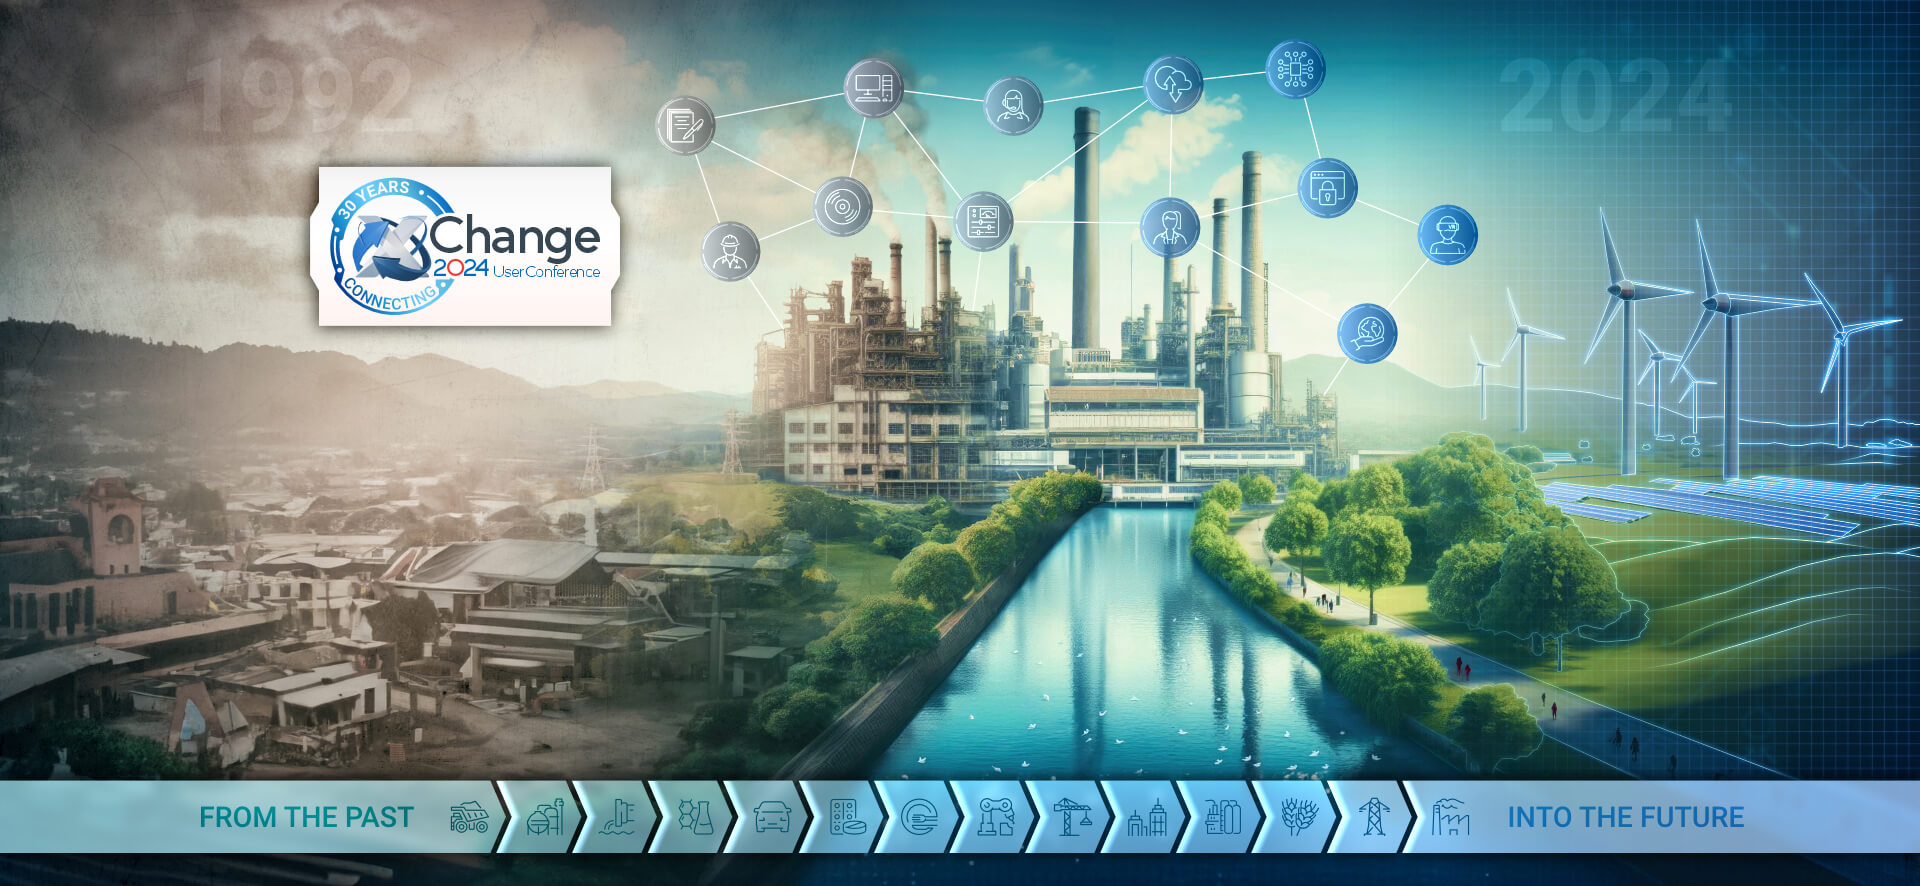 X-Change has been Connecting Industrial Ecosystems - For 30 Years.